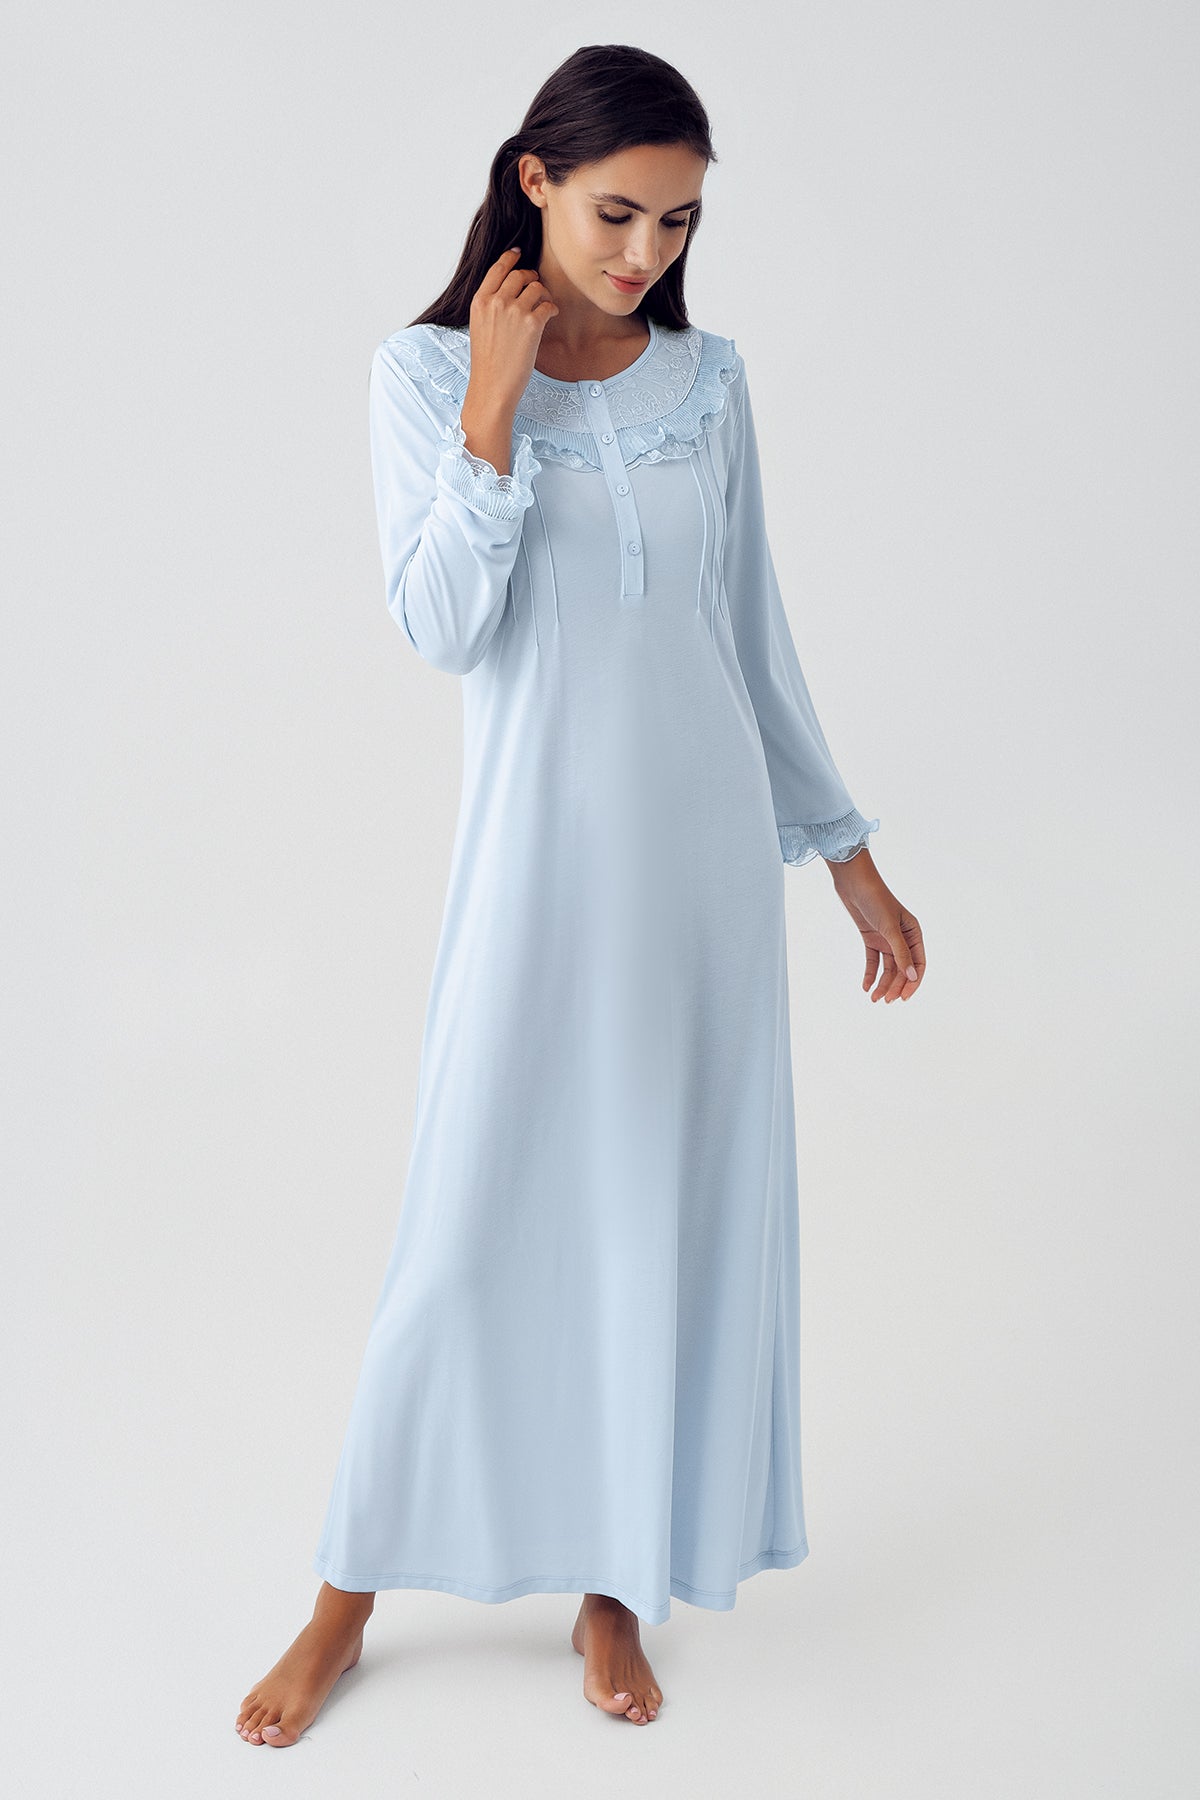 Shopymommy 15110 Lace Detailed Maternity & Nursing Nightgown Blue